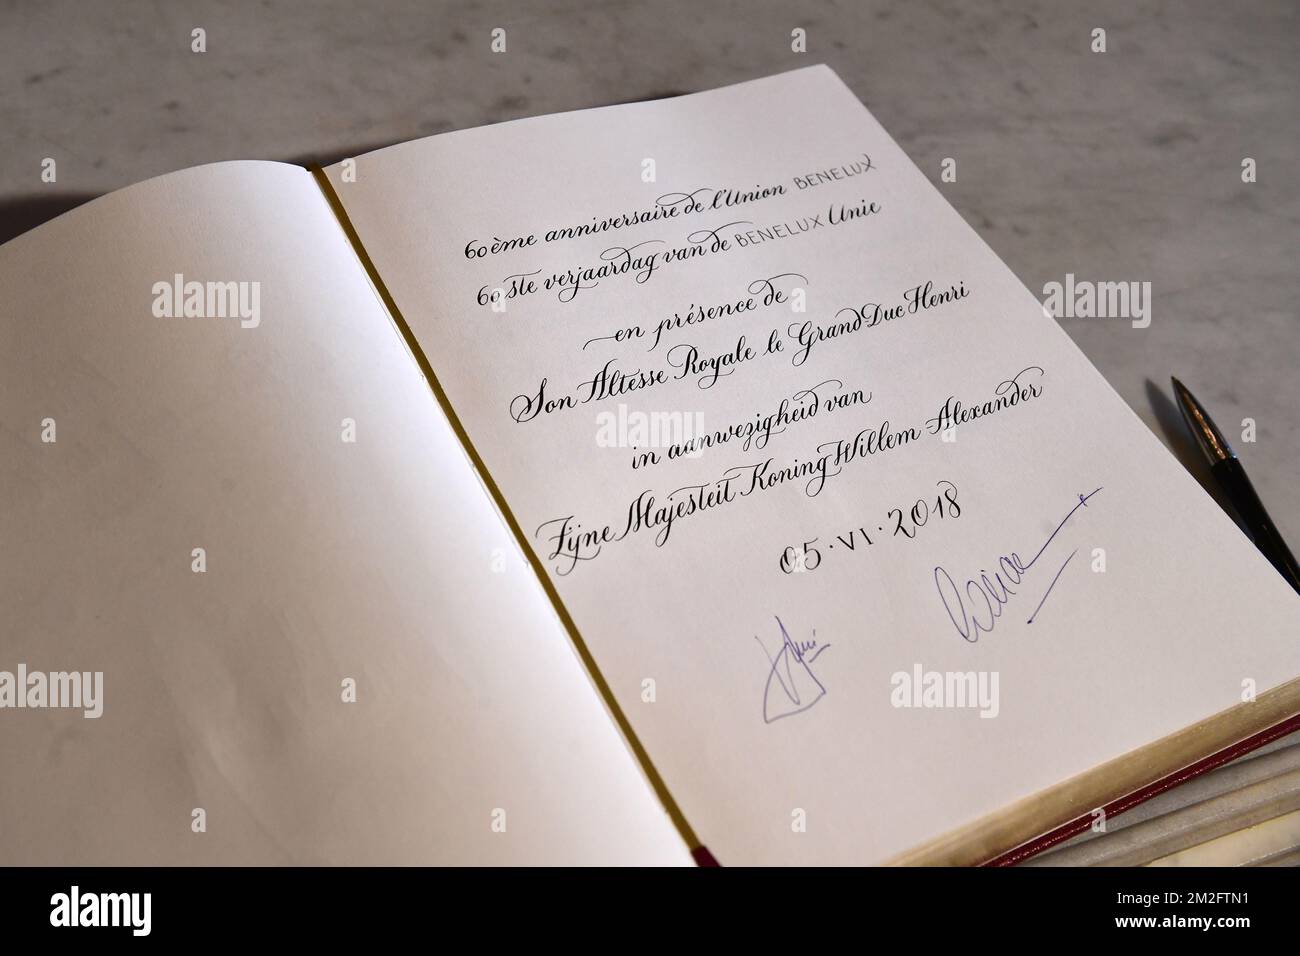 Illustration picture shows the signatures of Dutch King Willem-Alexander and Grand Duke Henri of Luxembourg during a visit to the Benelux General Secretariat on the occasion of the 60th anniversary of the Benelux Union, Tuesday 05 June 2018, at the Royal Palace in Brussels. BELGA PHOTO LAURIE DIEFFEMBACQ  Stock Photo